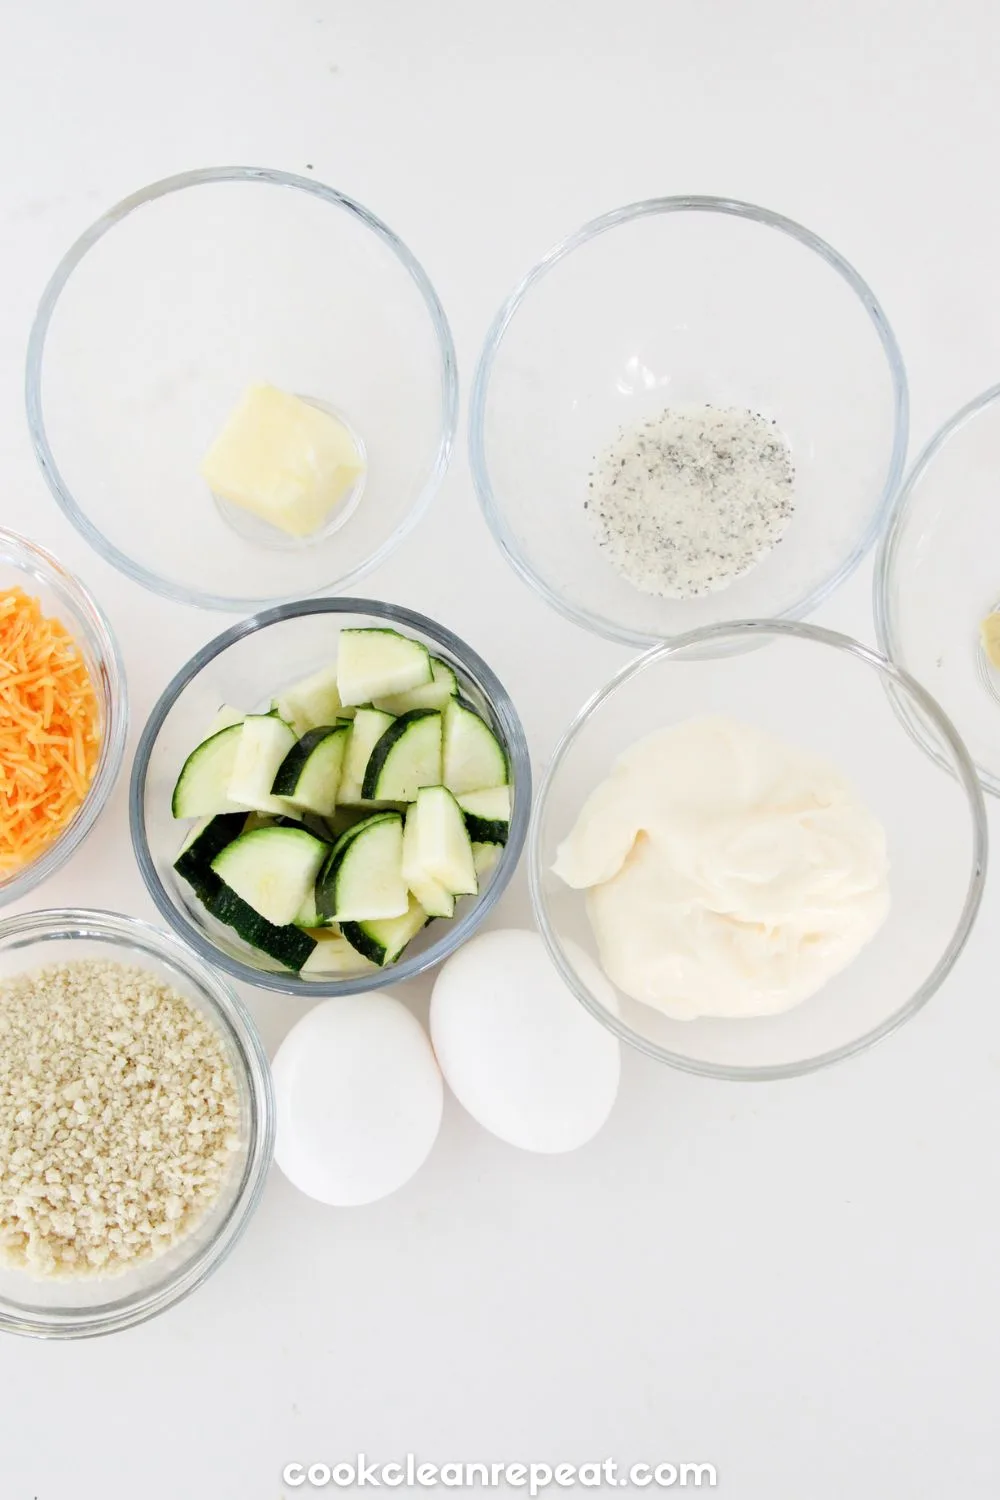 ingredients for this zucchini casserole recipe